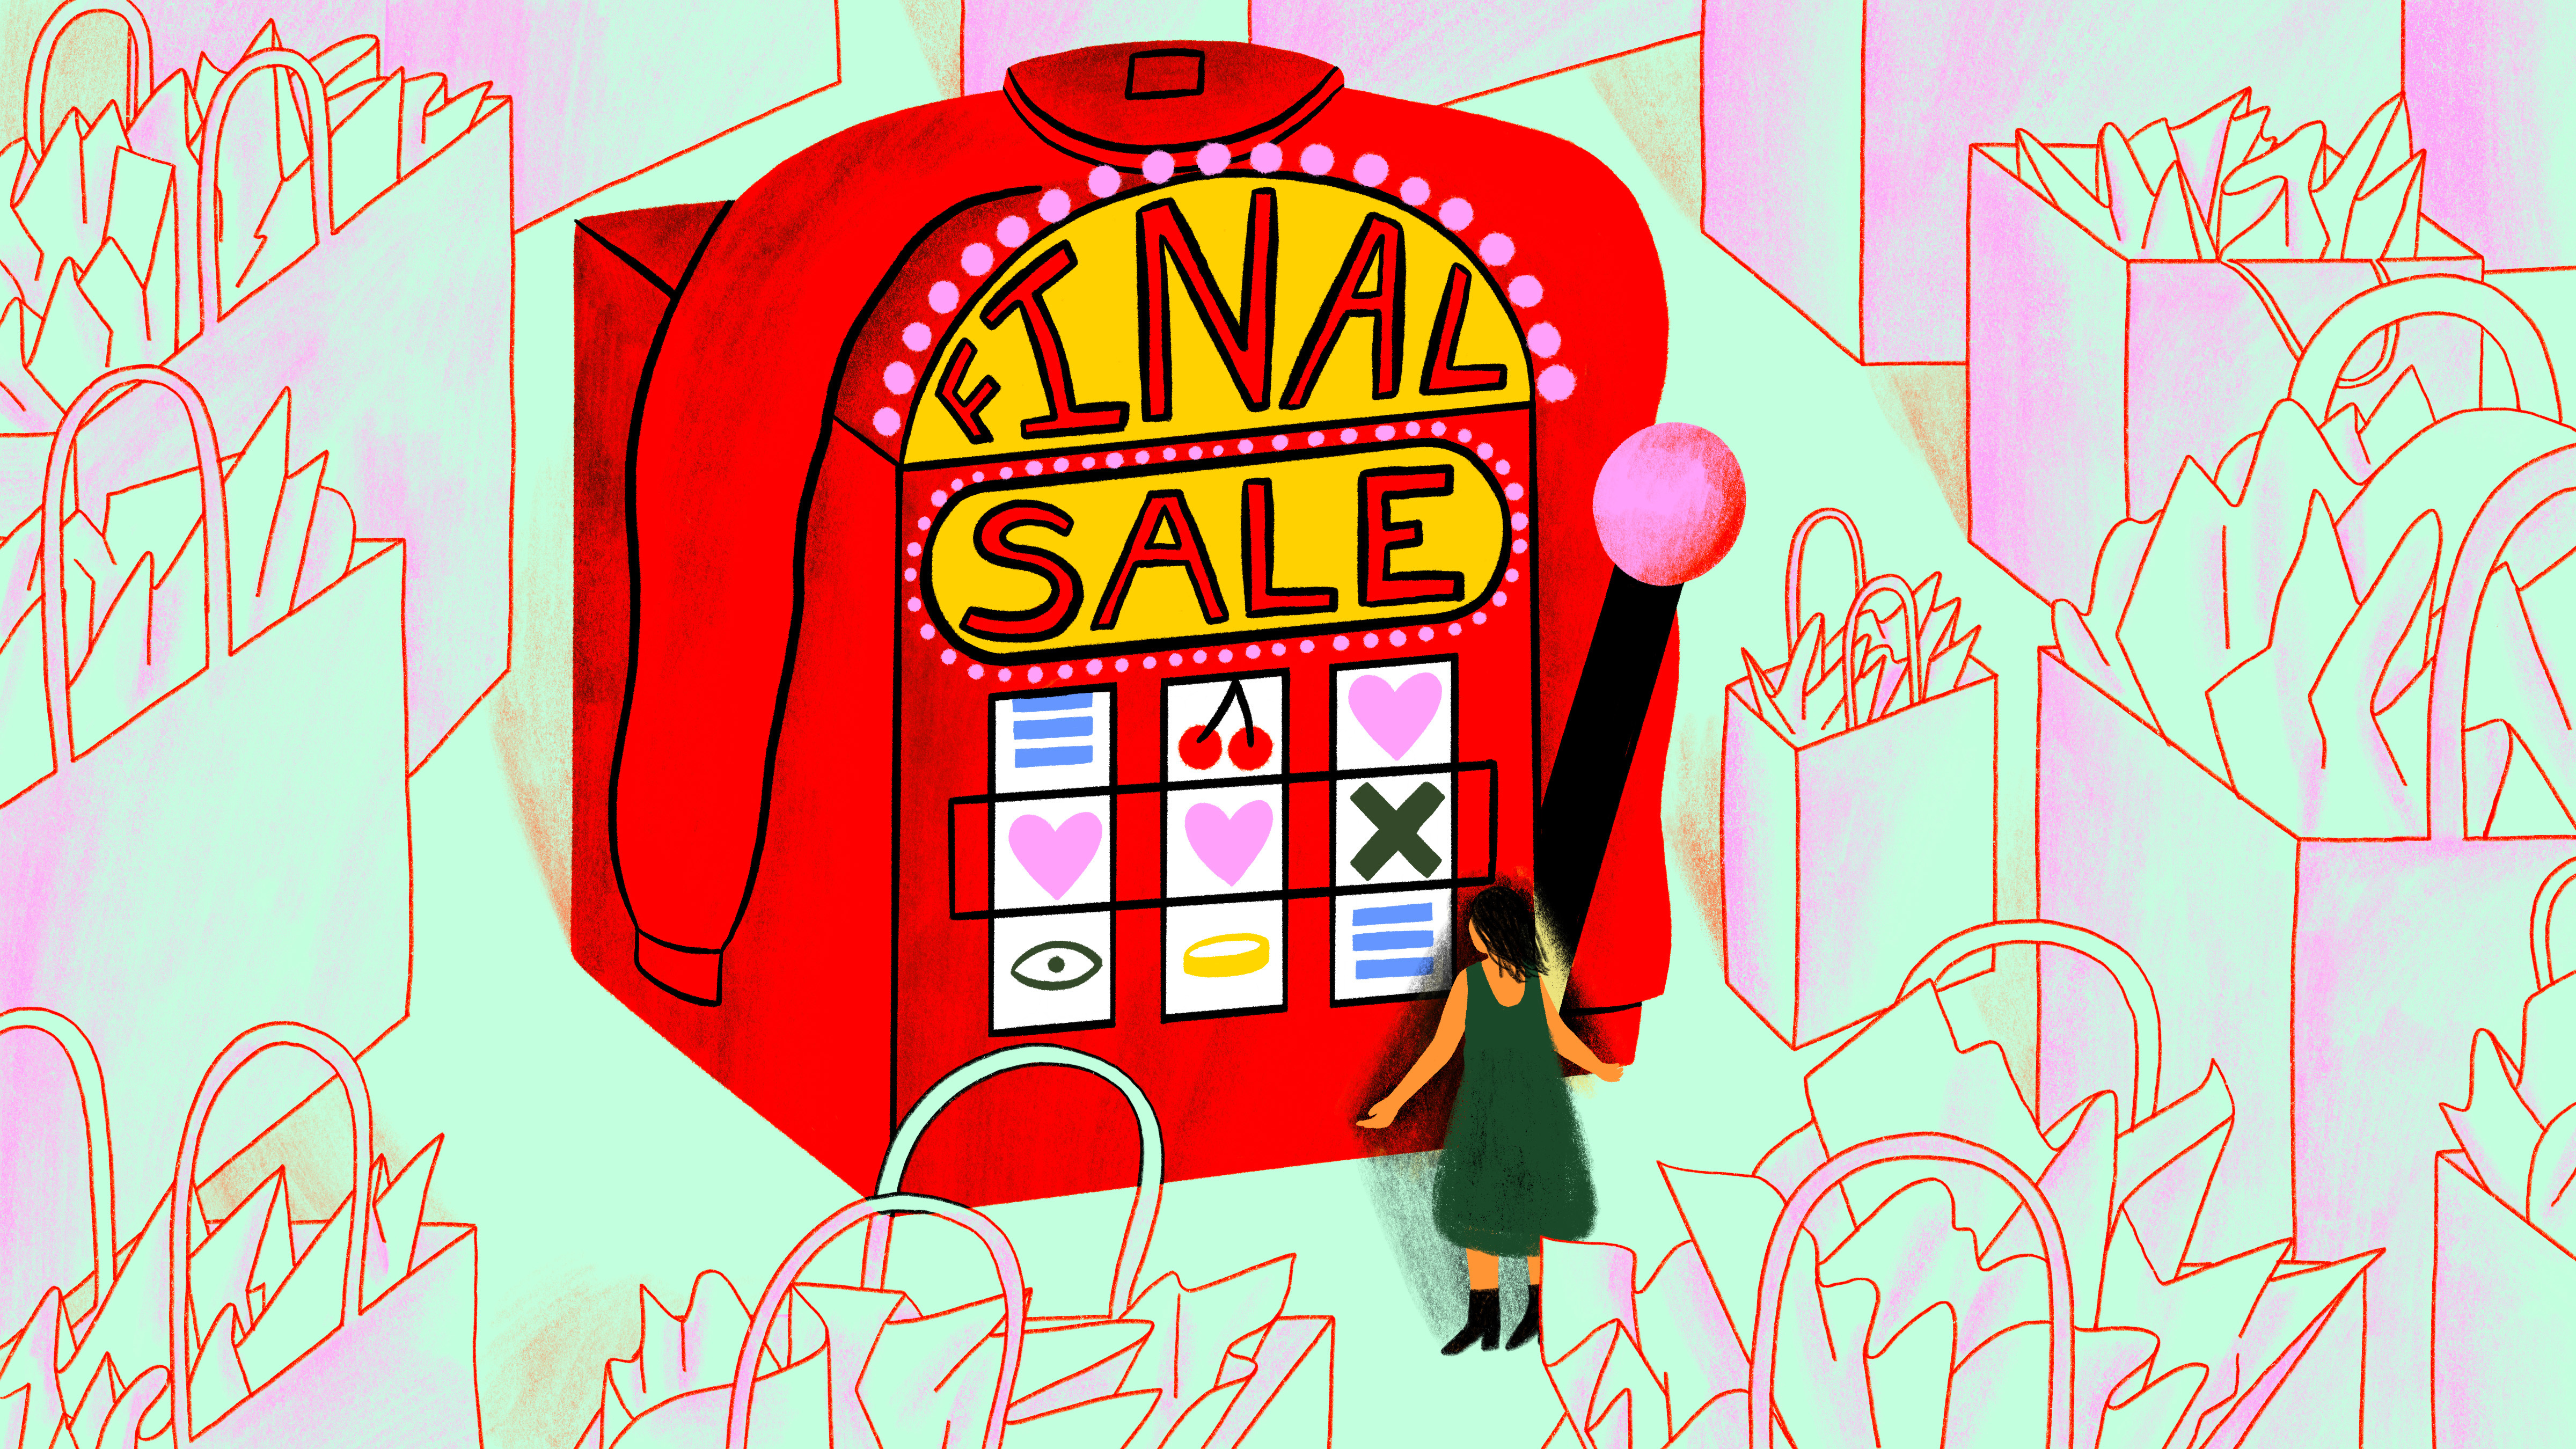 An illustration shows a woman looking at a large red slot machine labeled “Final Sale.”